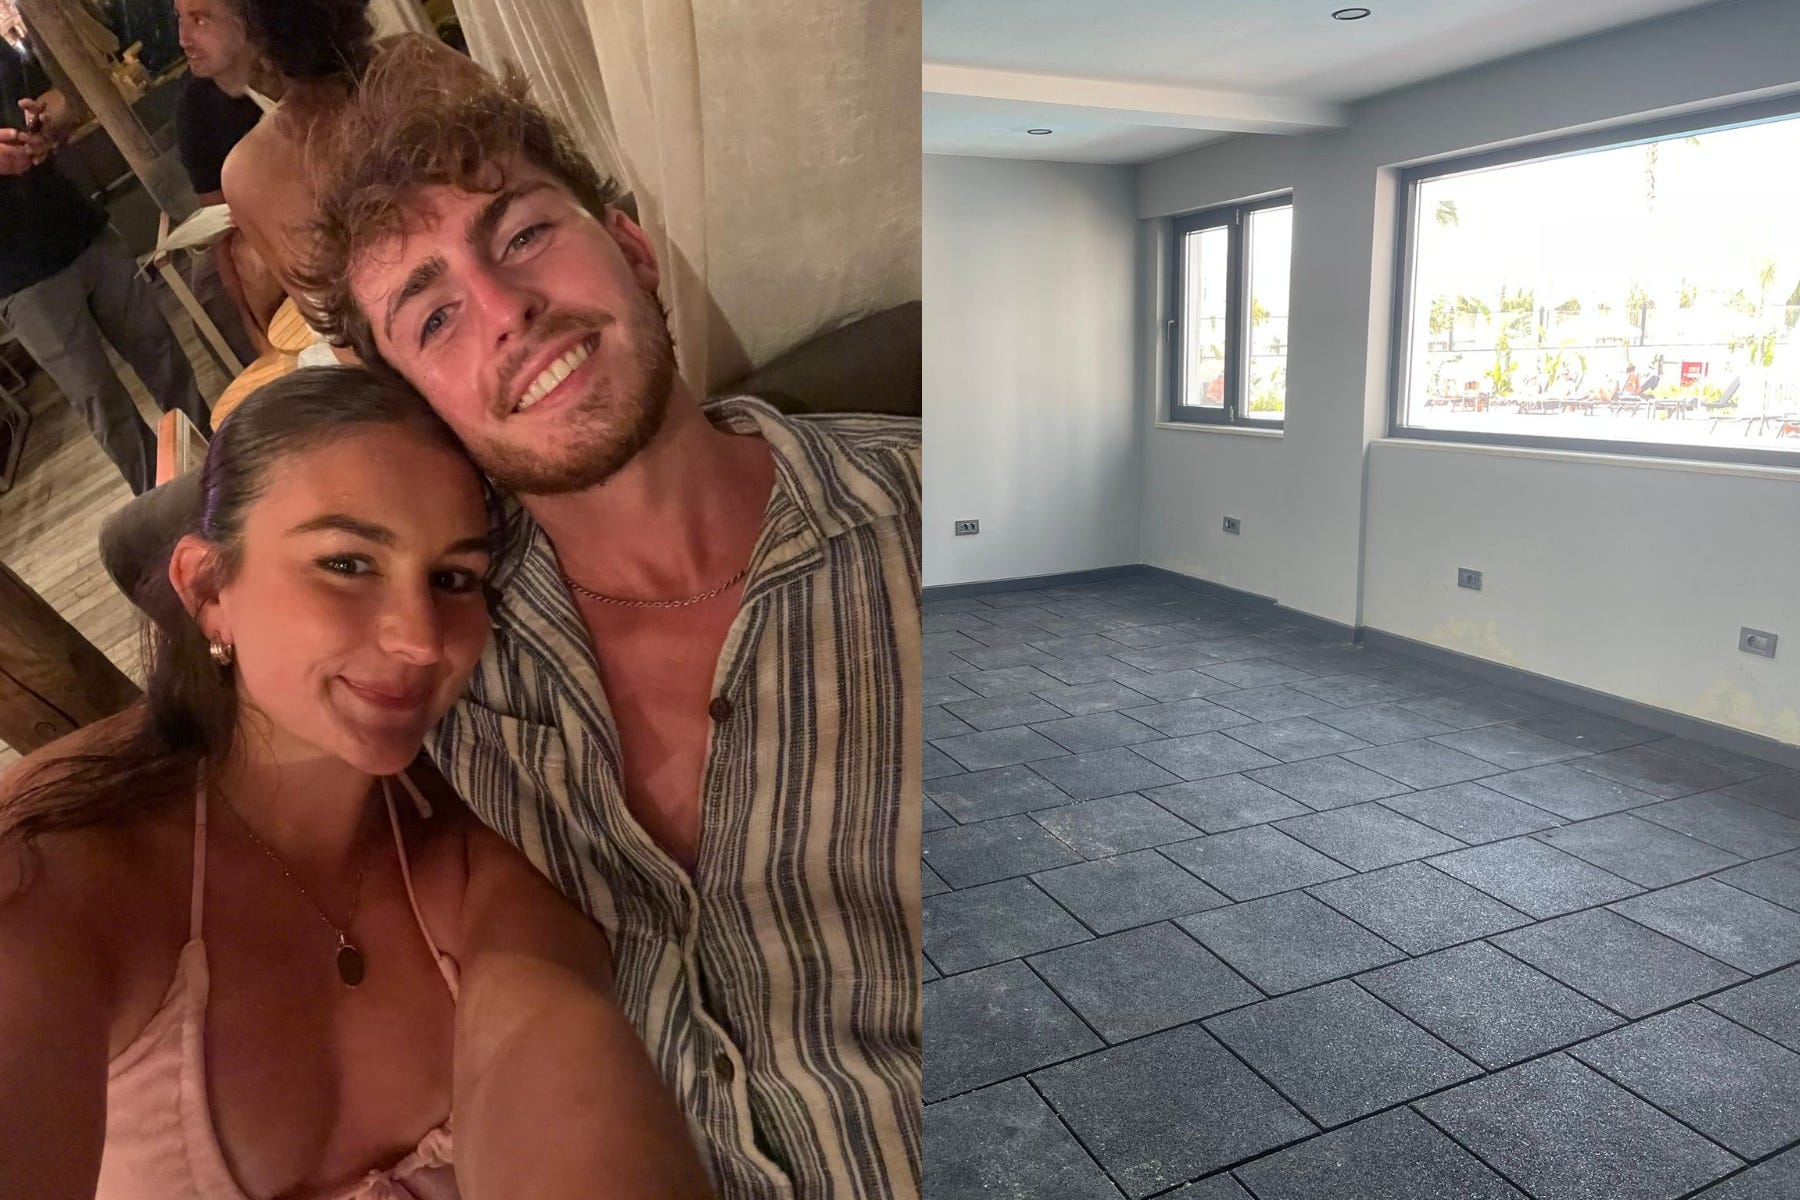 independent.co.uk - Sarah Ping - Couple 'dumped' at unfinished Turkish hotel for nearly a week after global IT outage